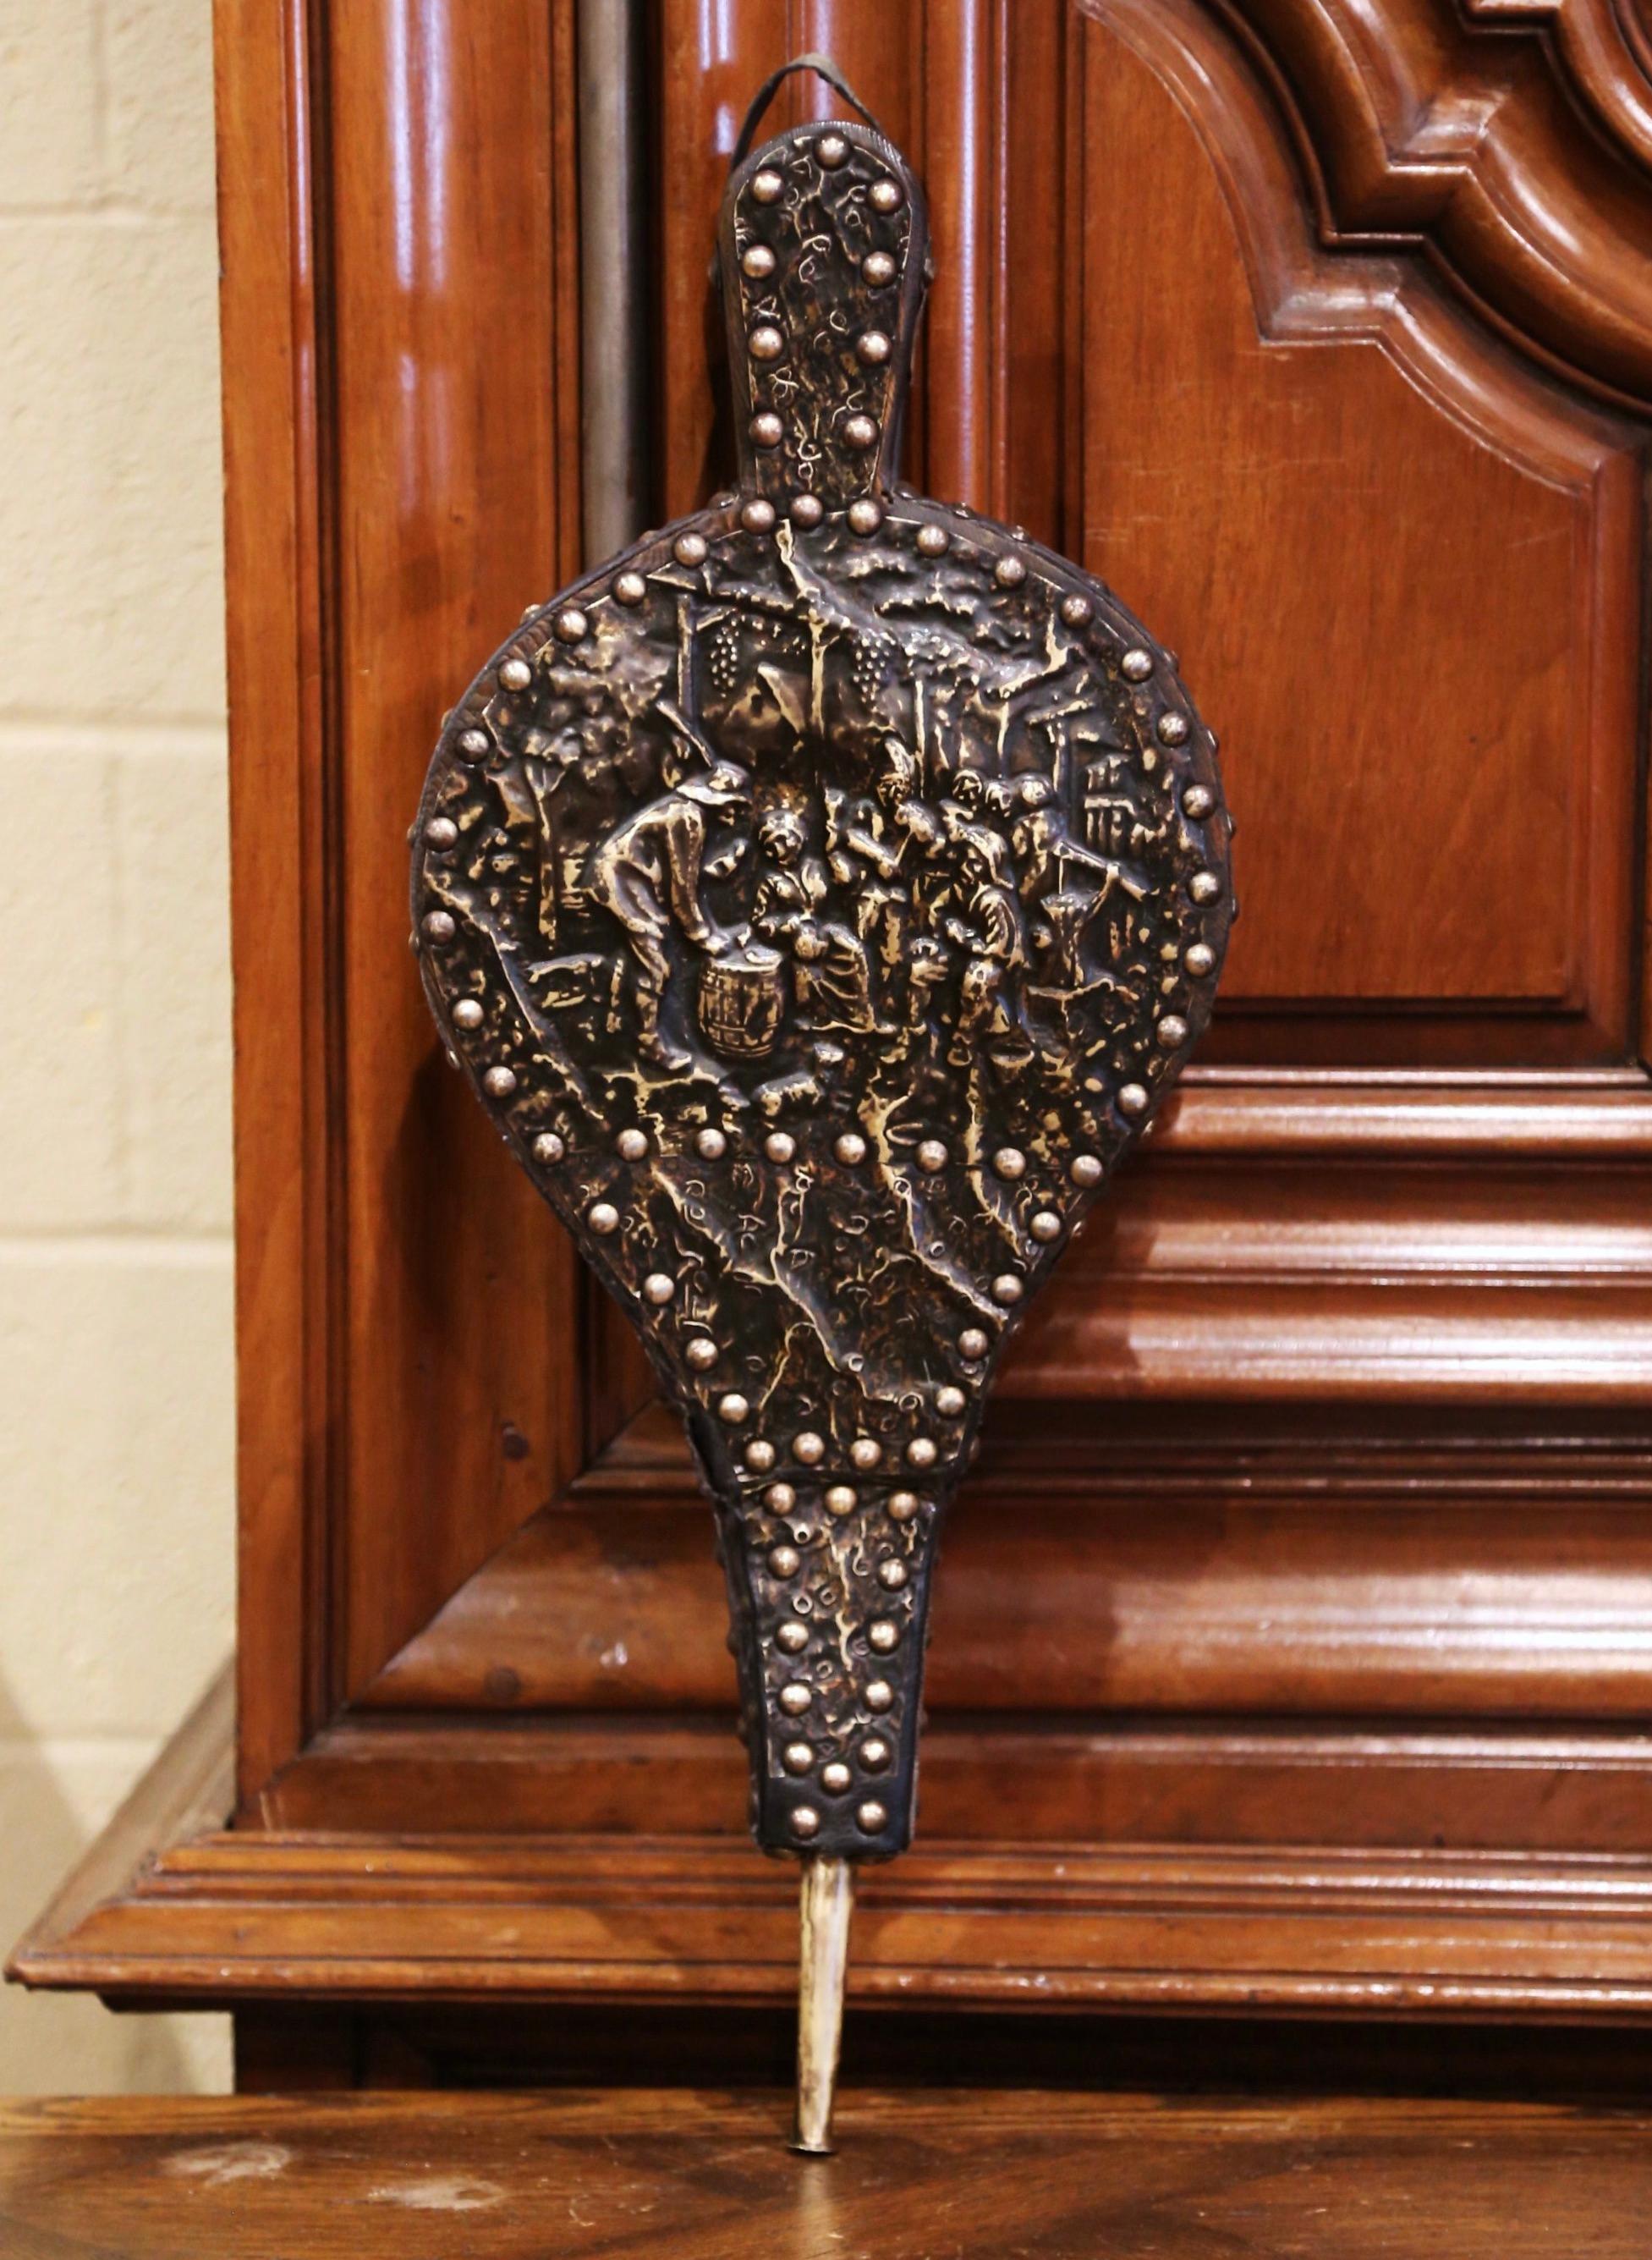 Decorate a fireplace and active the flames with this elegant and useful antique bellows. Crafted in Brittany, France, circa 1880, the fireplace essential features a repousse brass top surface depicting a pastoral tavern scene in the manner of